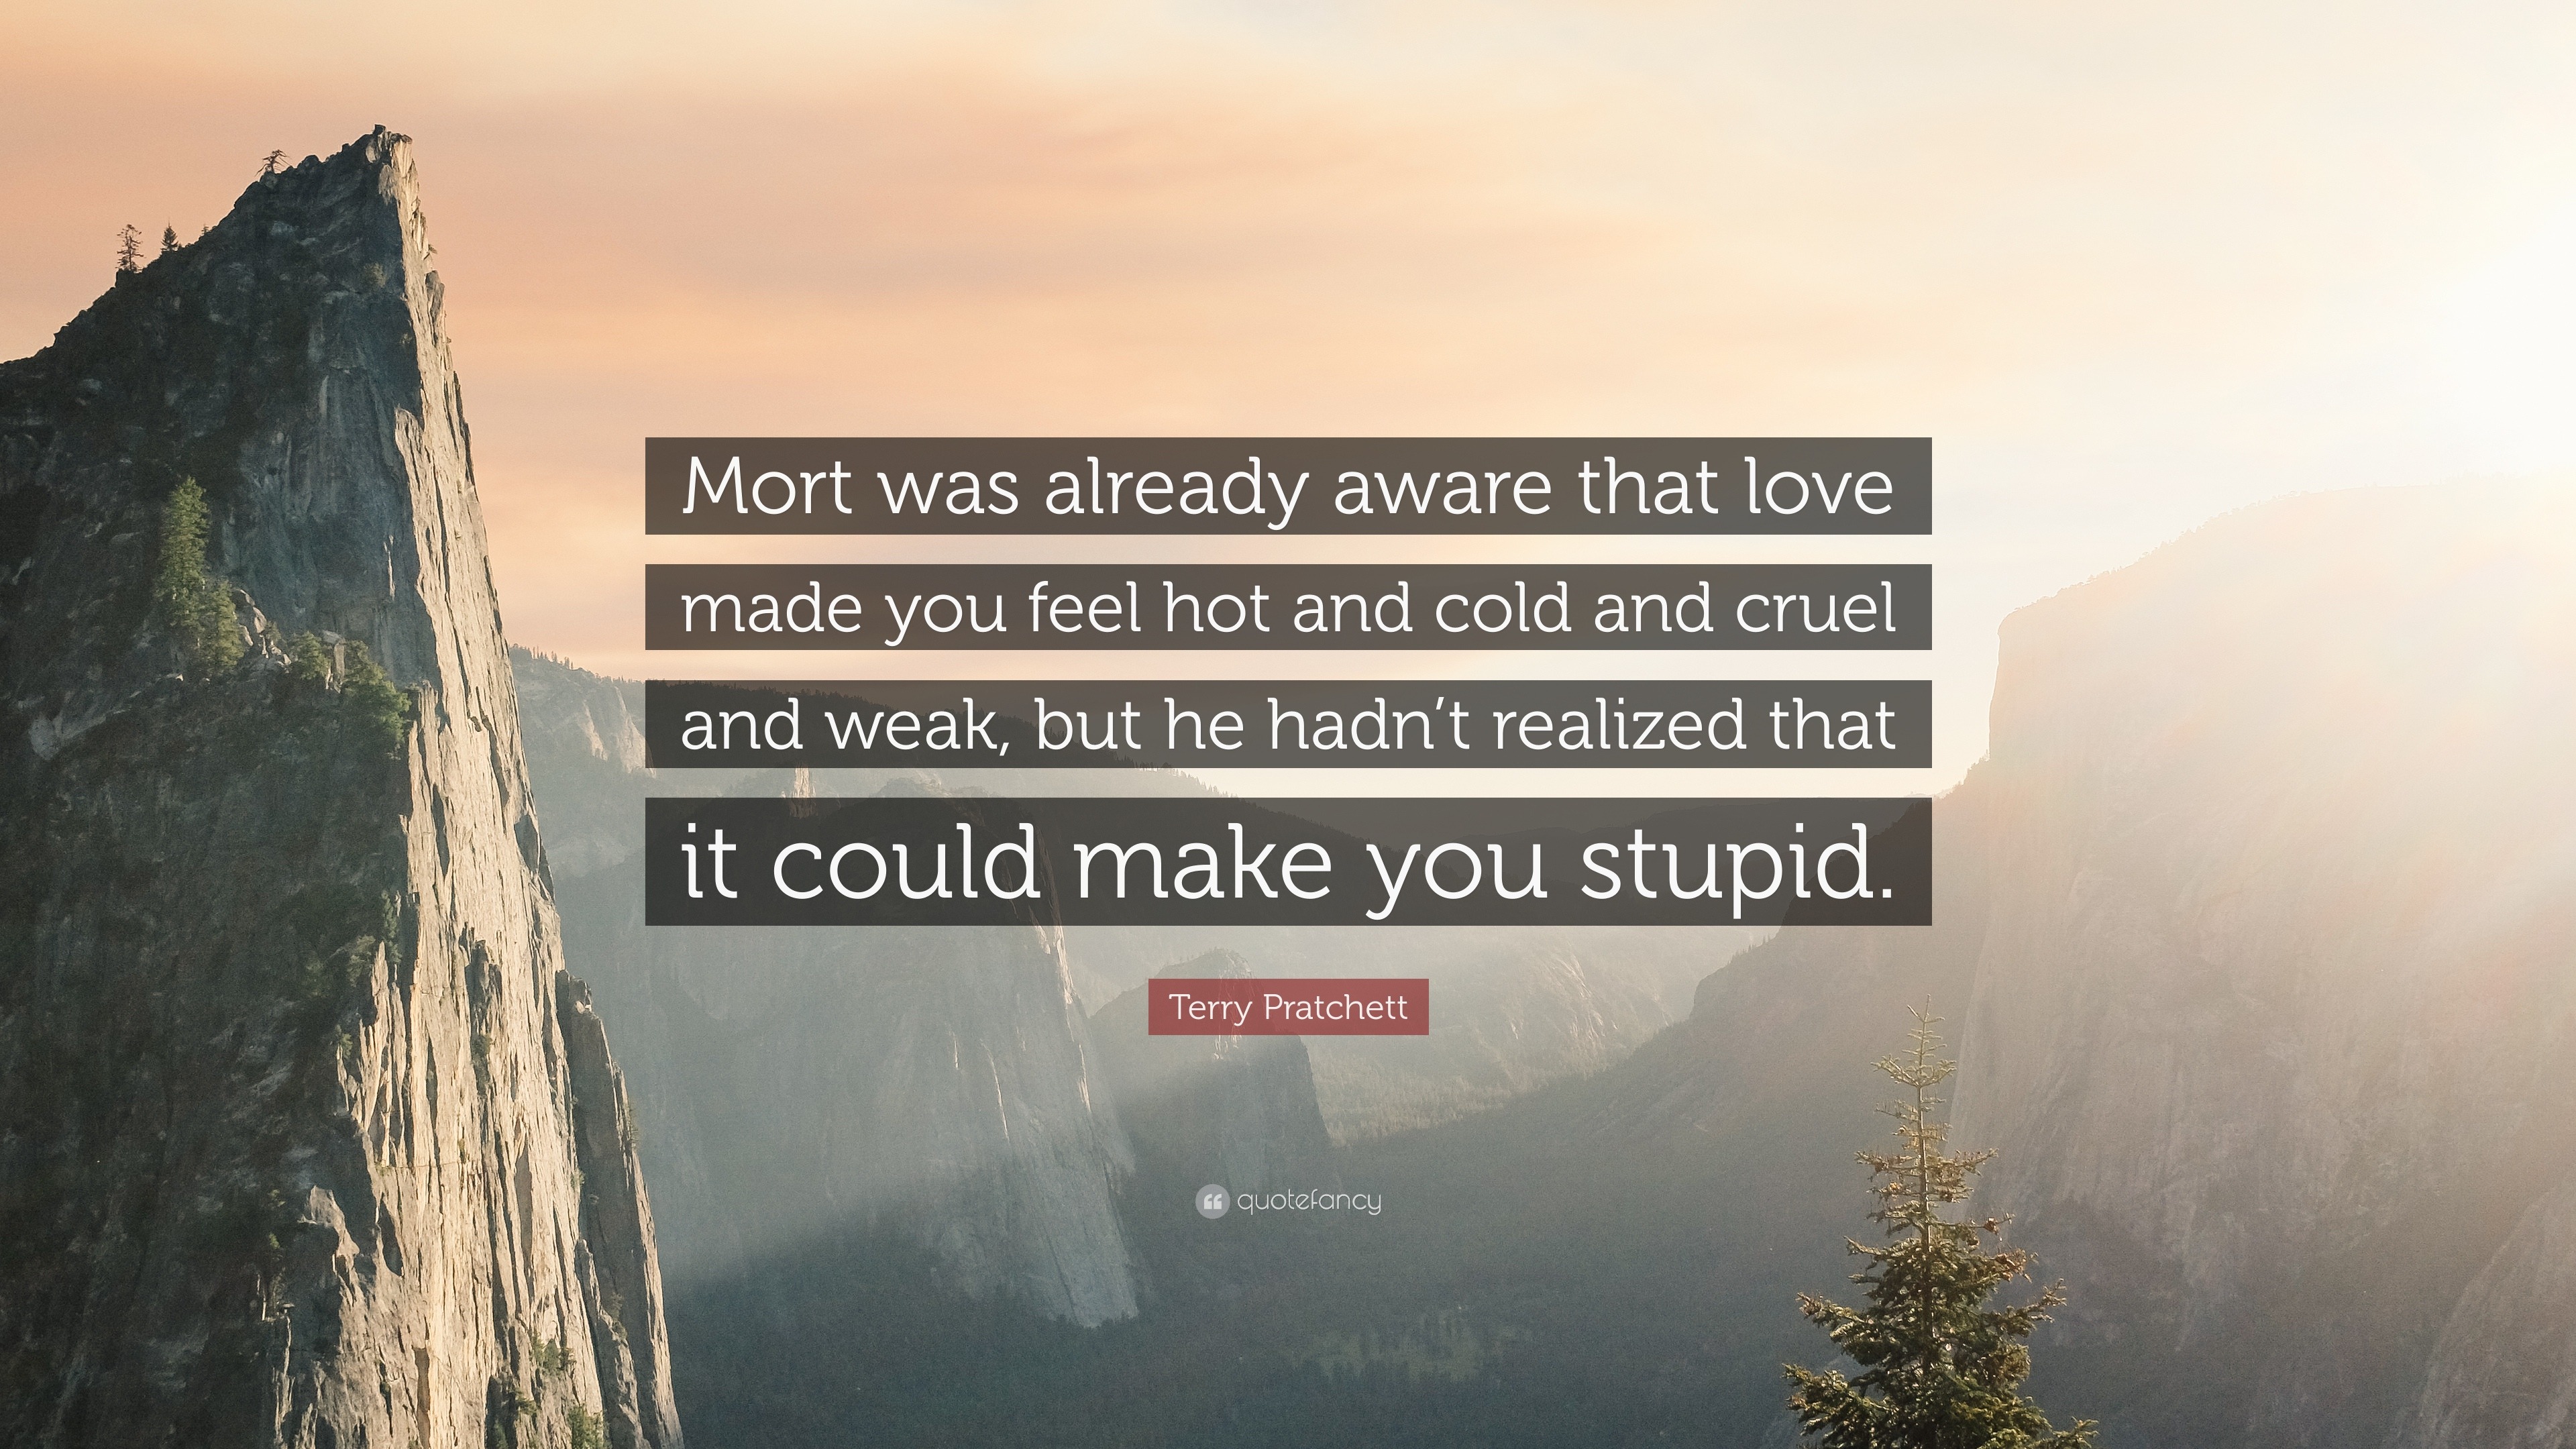 Terry Pratchett Quote: “Mort was already aware that love made you feel hot  and cold and cruel and weak, but he hadn't realized that it could mak...”